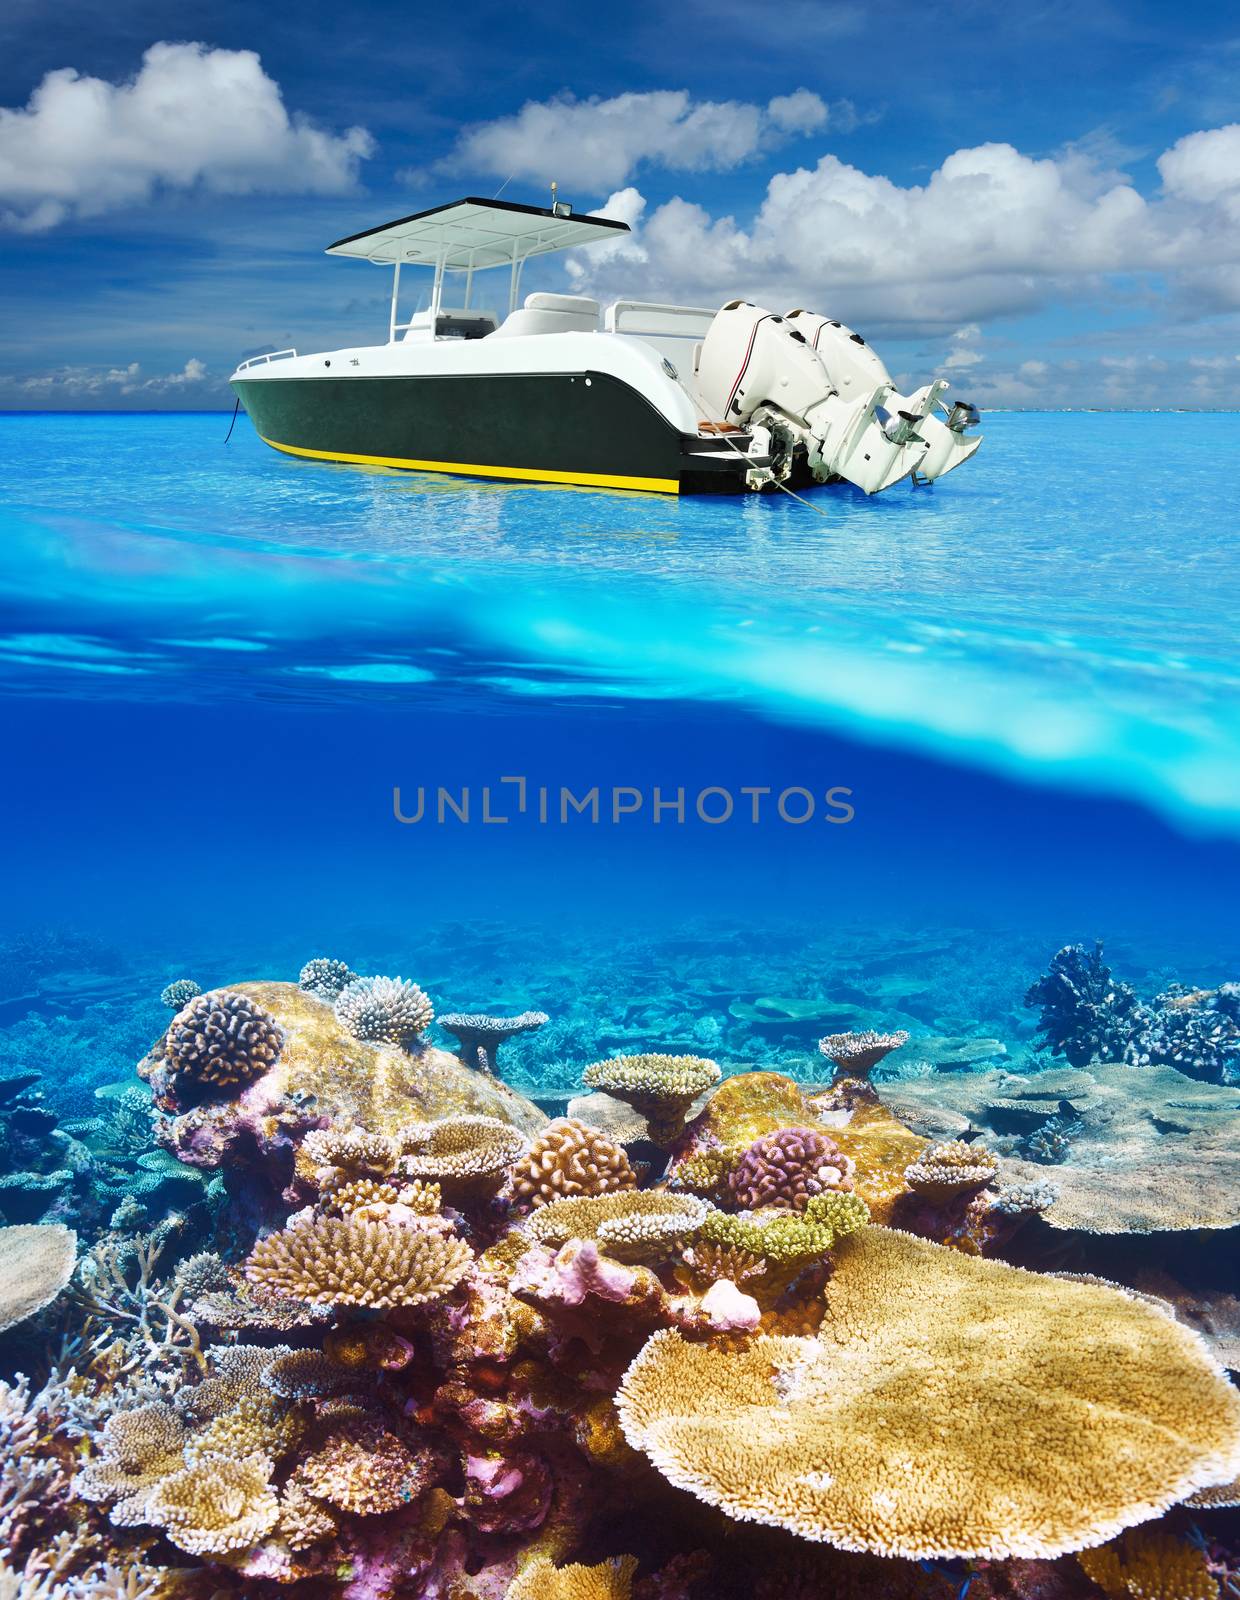 Beach and motor boat with coral reef underwater view by haveseen